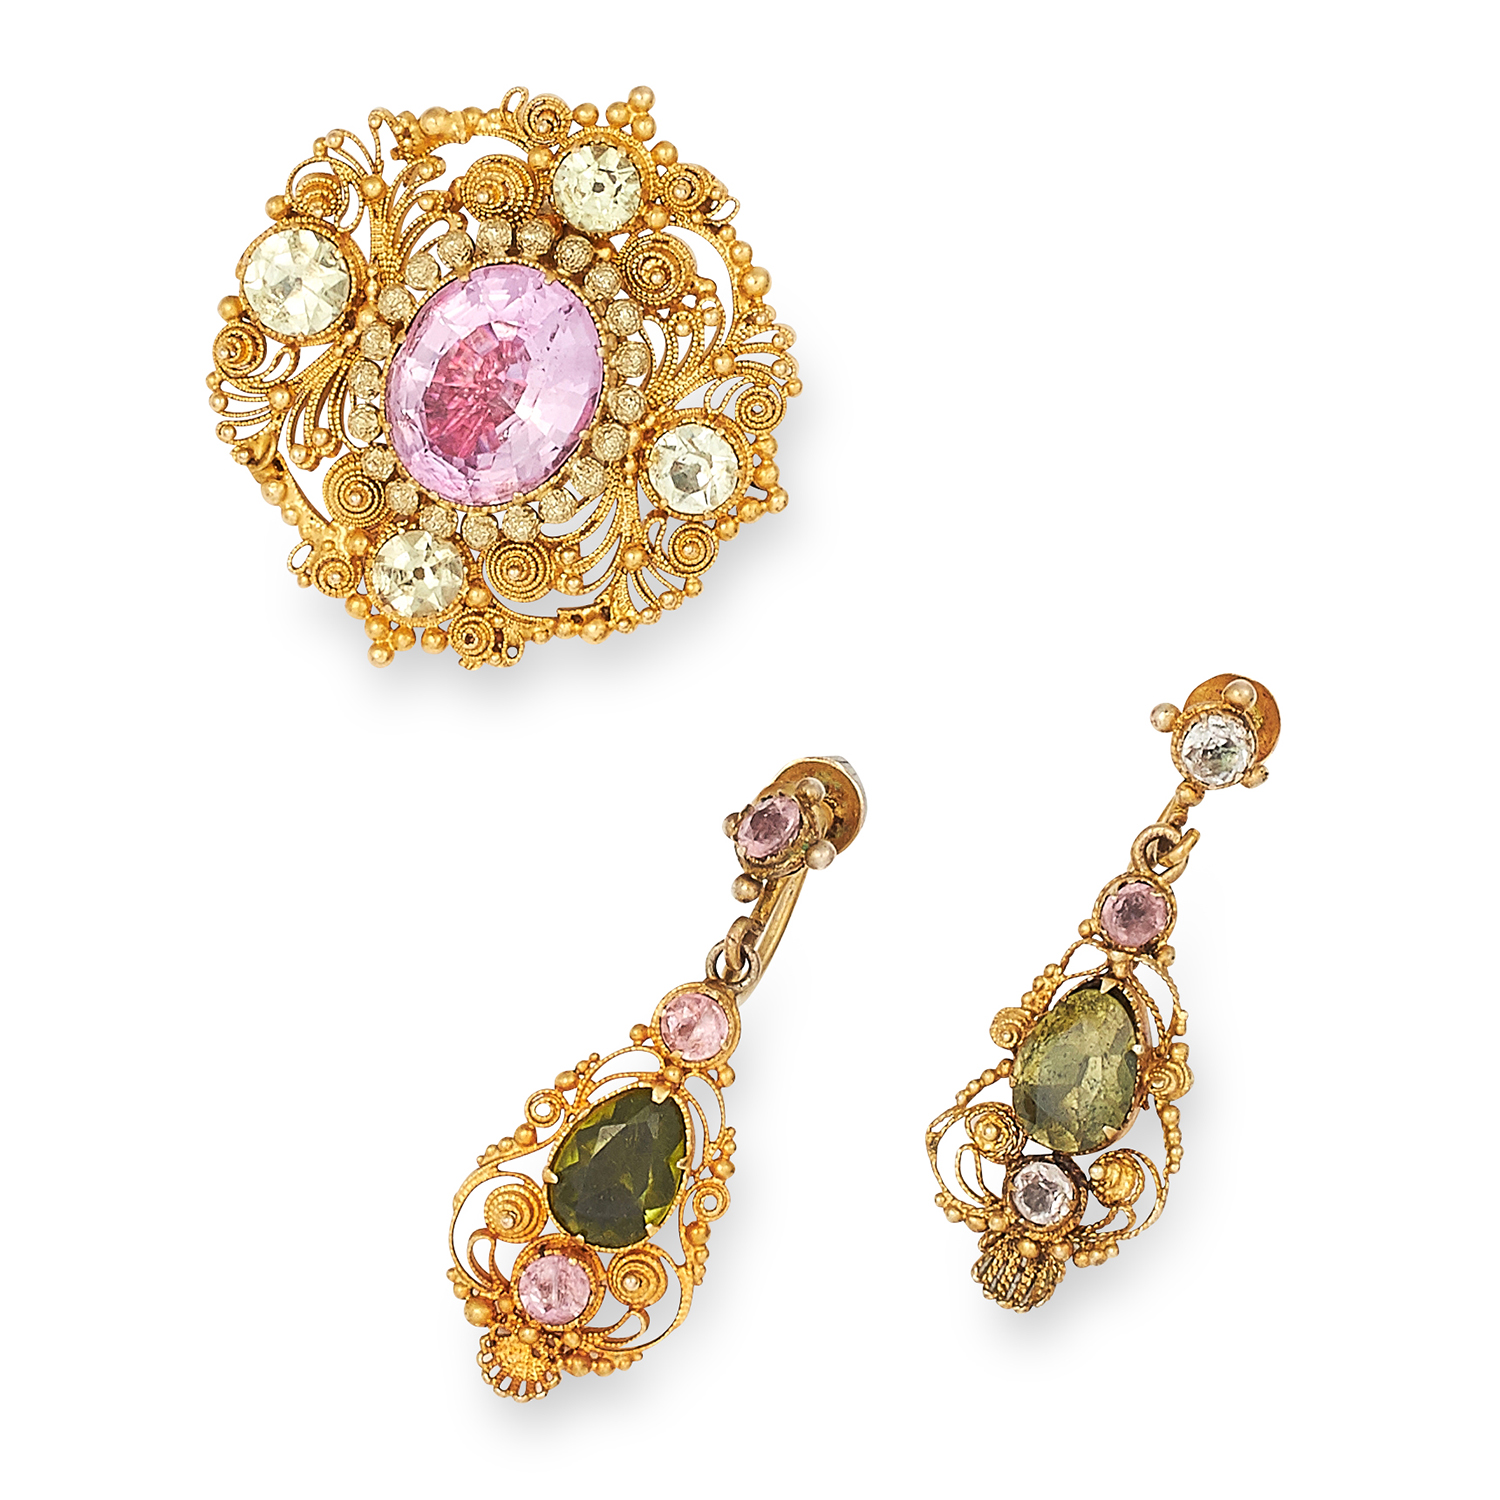 ANTIQUE GEORGIAN PINK TOPAZ AND CHRYSOBERYL NECKLACE, EARRING AND BROOCH DEMI PATURE set with round, - Image 2 of 2